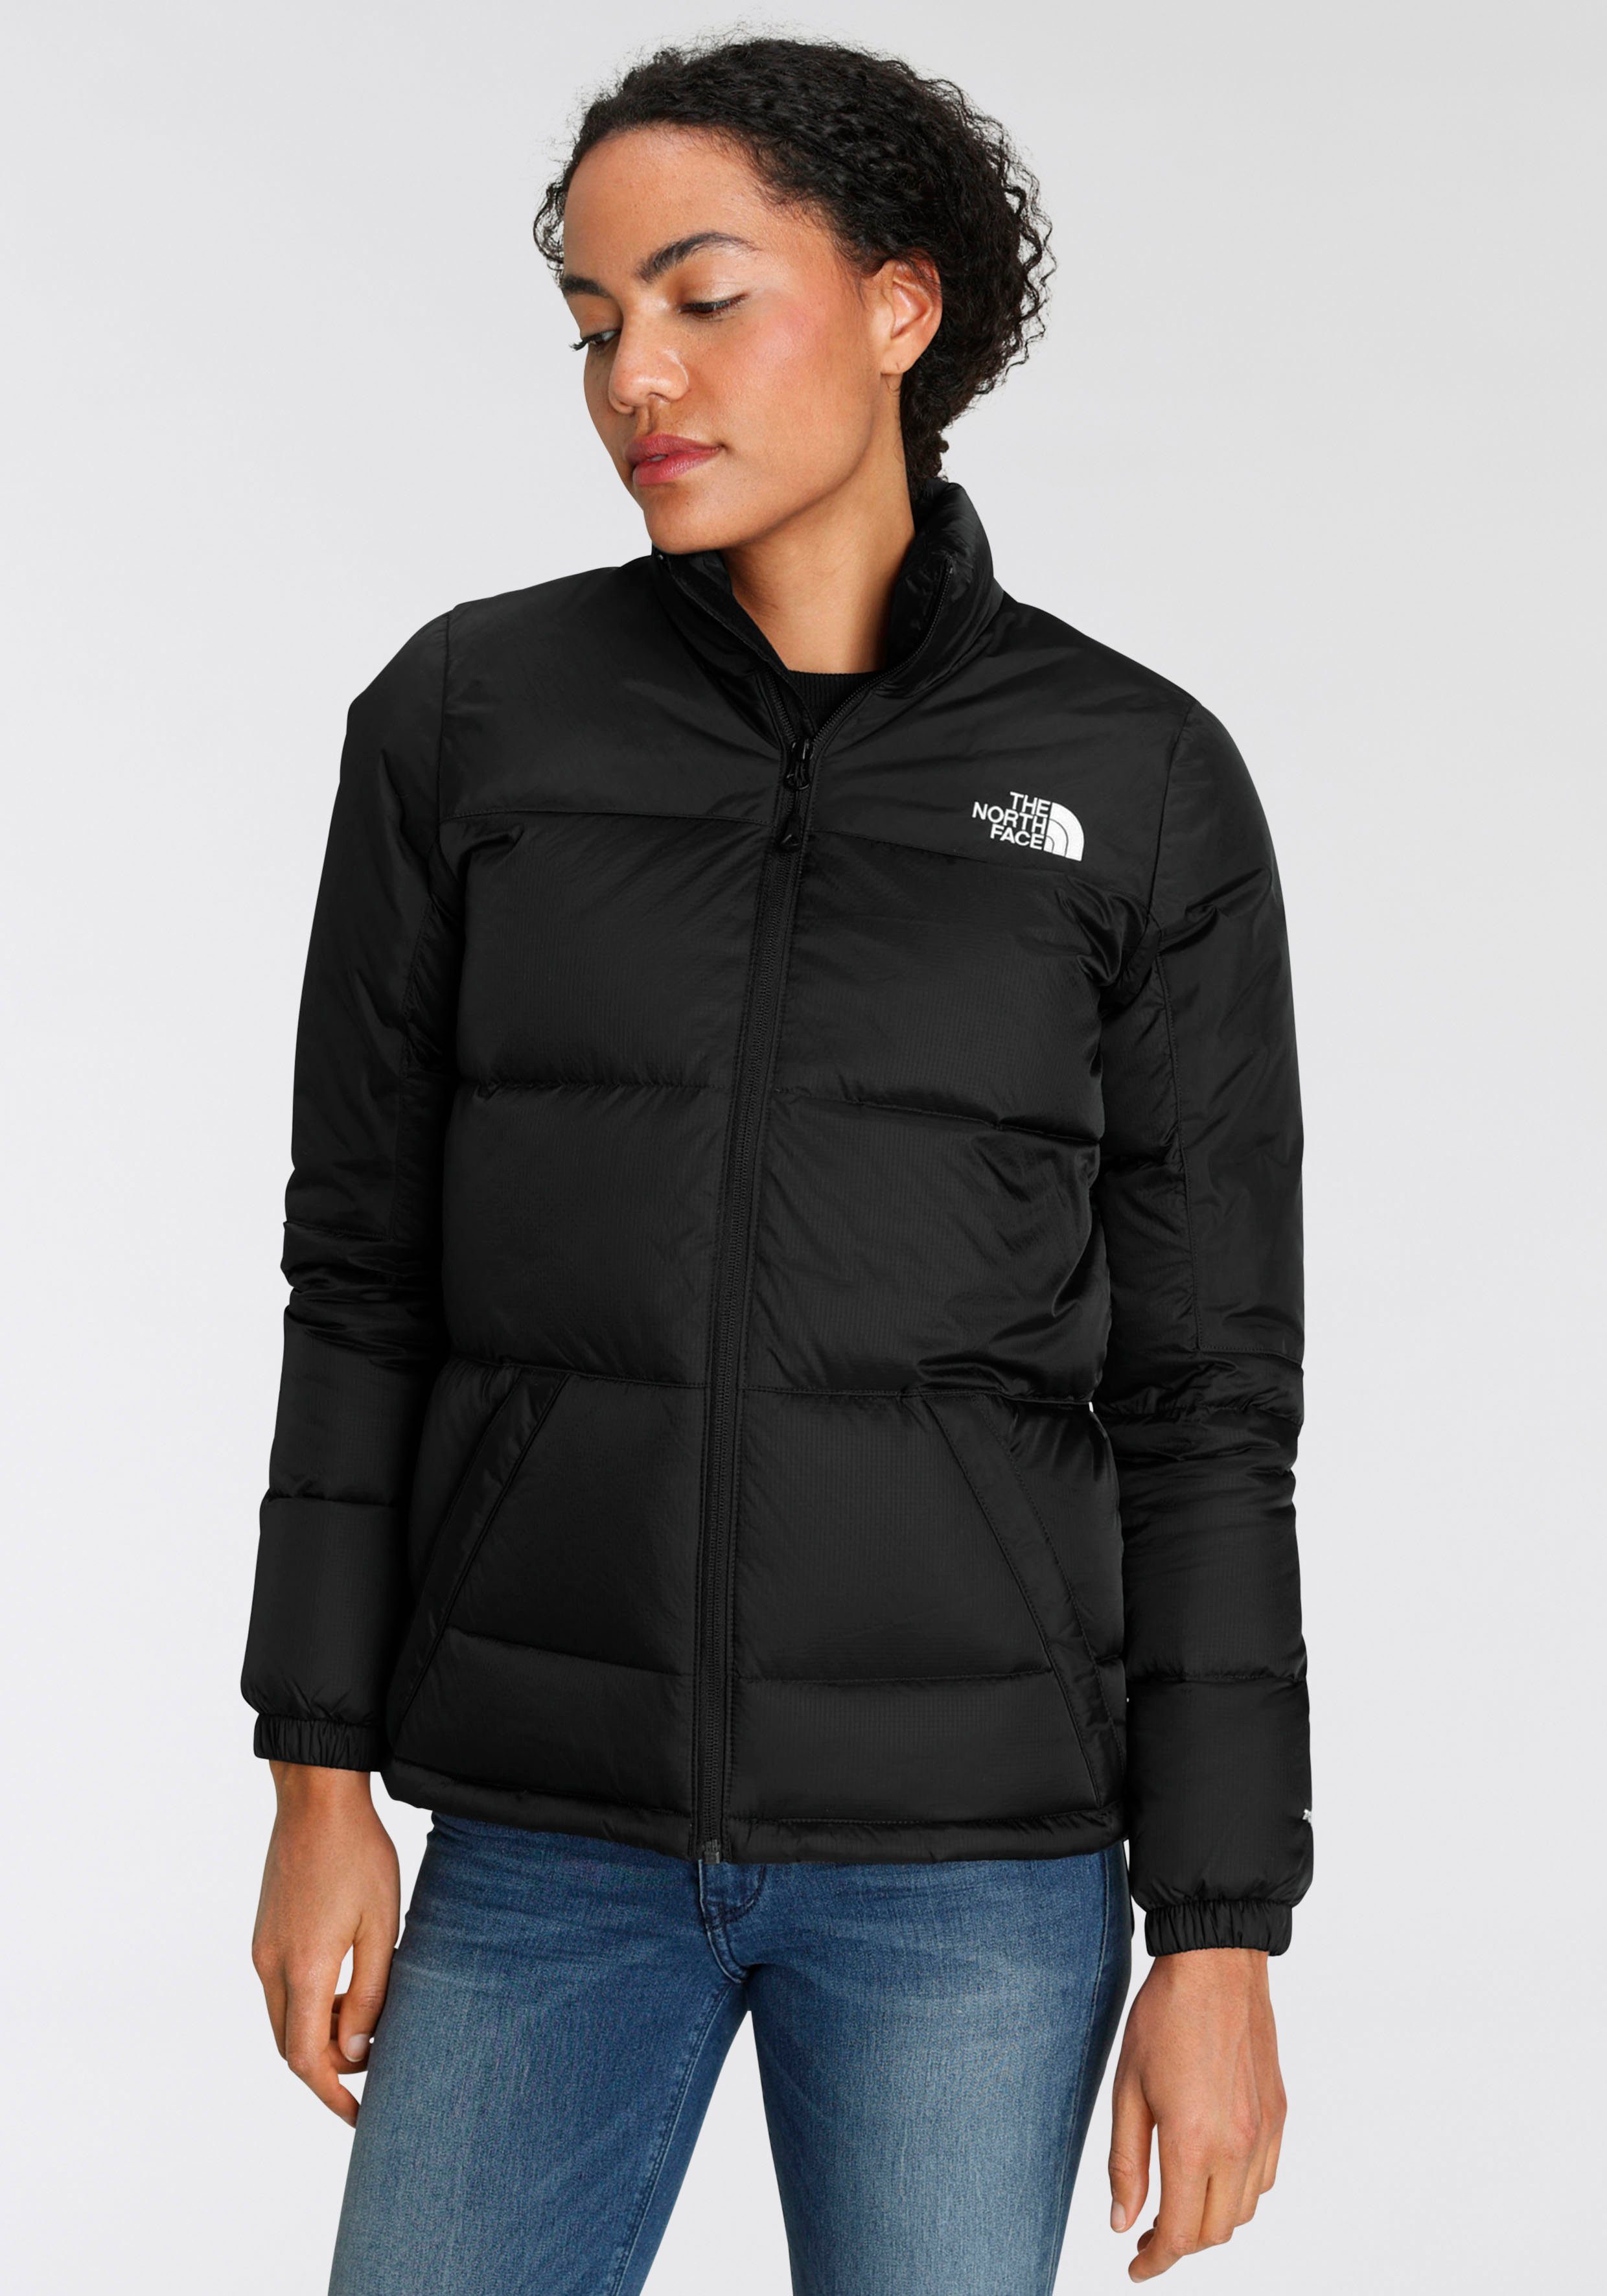 Black Friday The North Face Online-Shop | OTTO